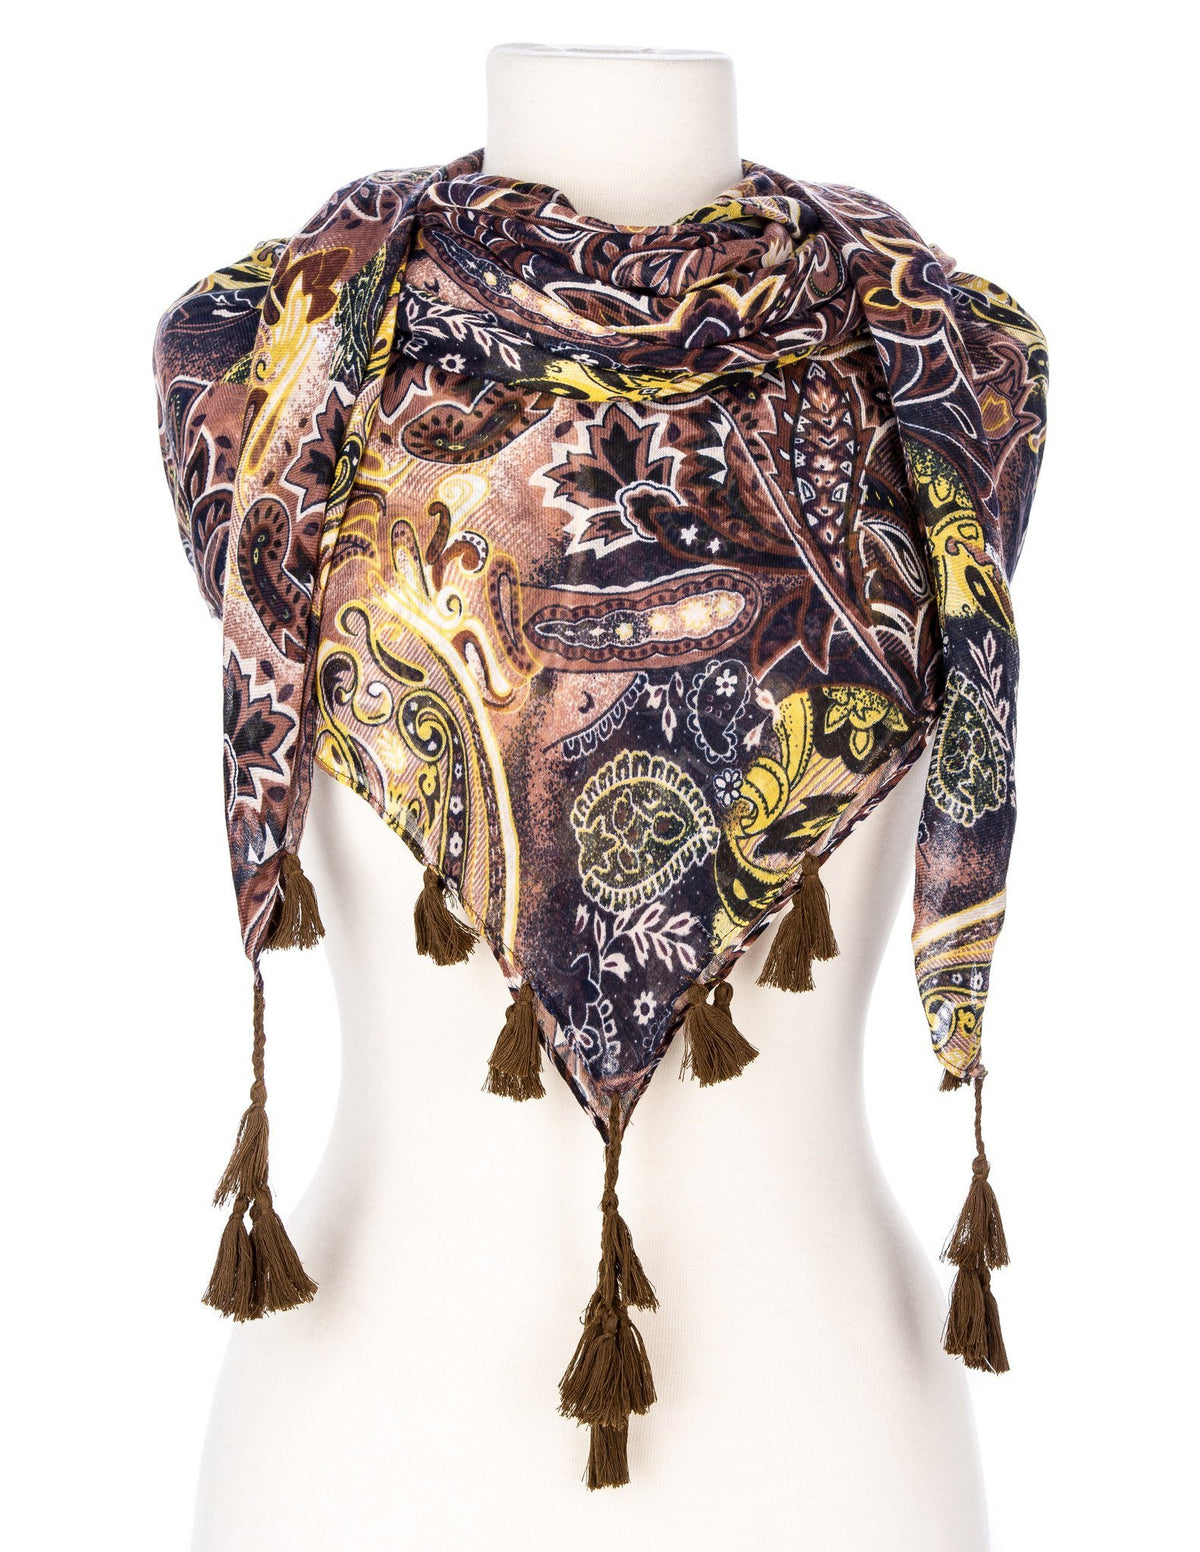 Peacock Flair Spring Scarf - Brown/Navy/yellow